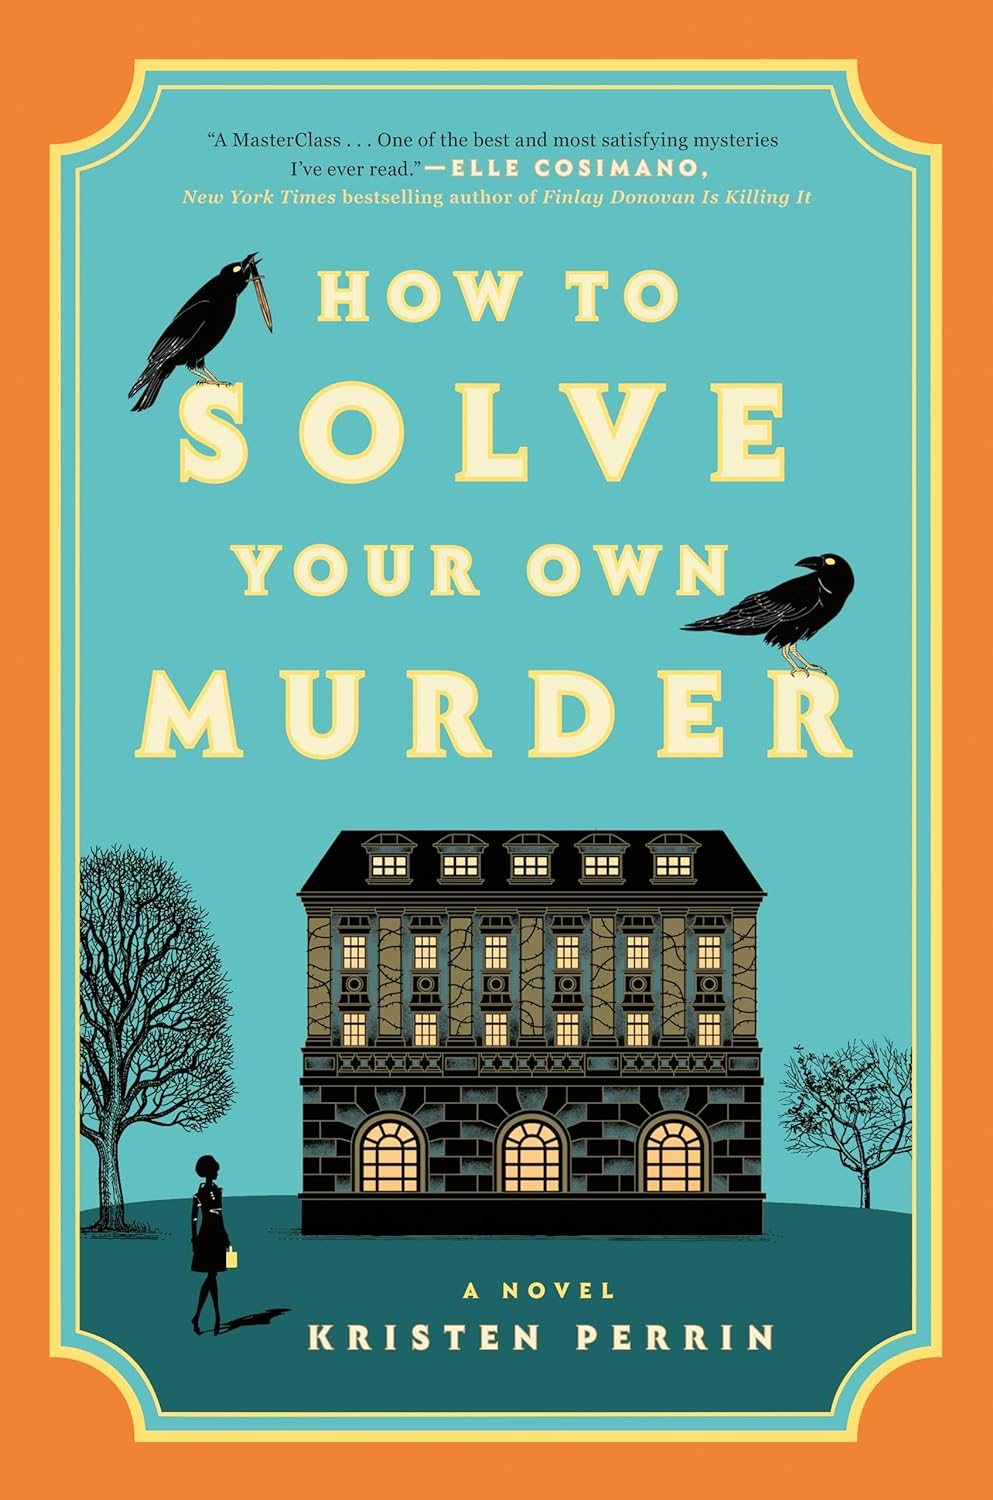 Image for "How to Solve Your Own Murder"